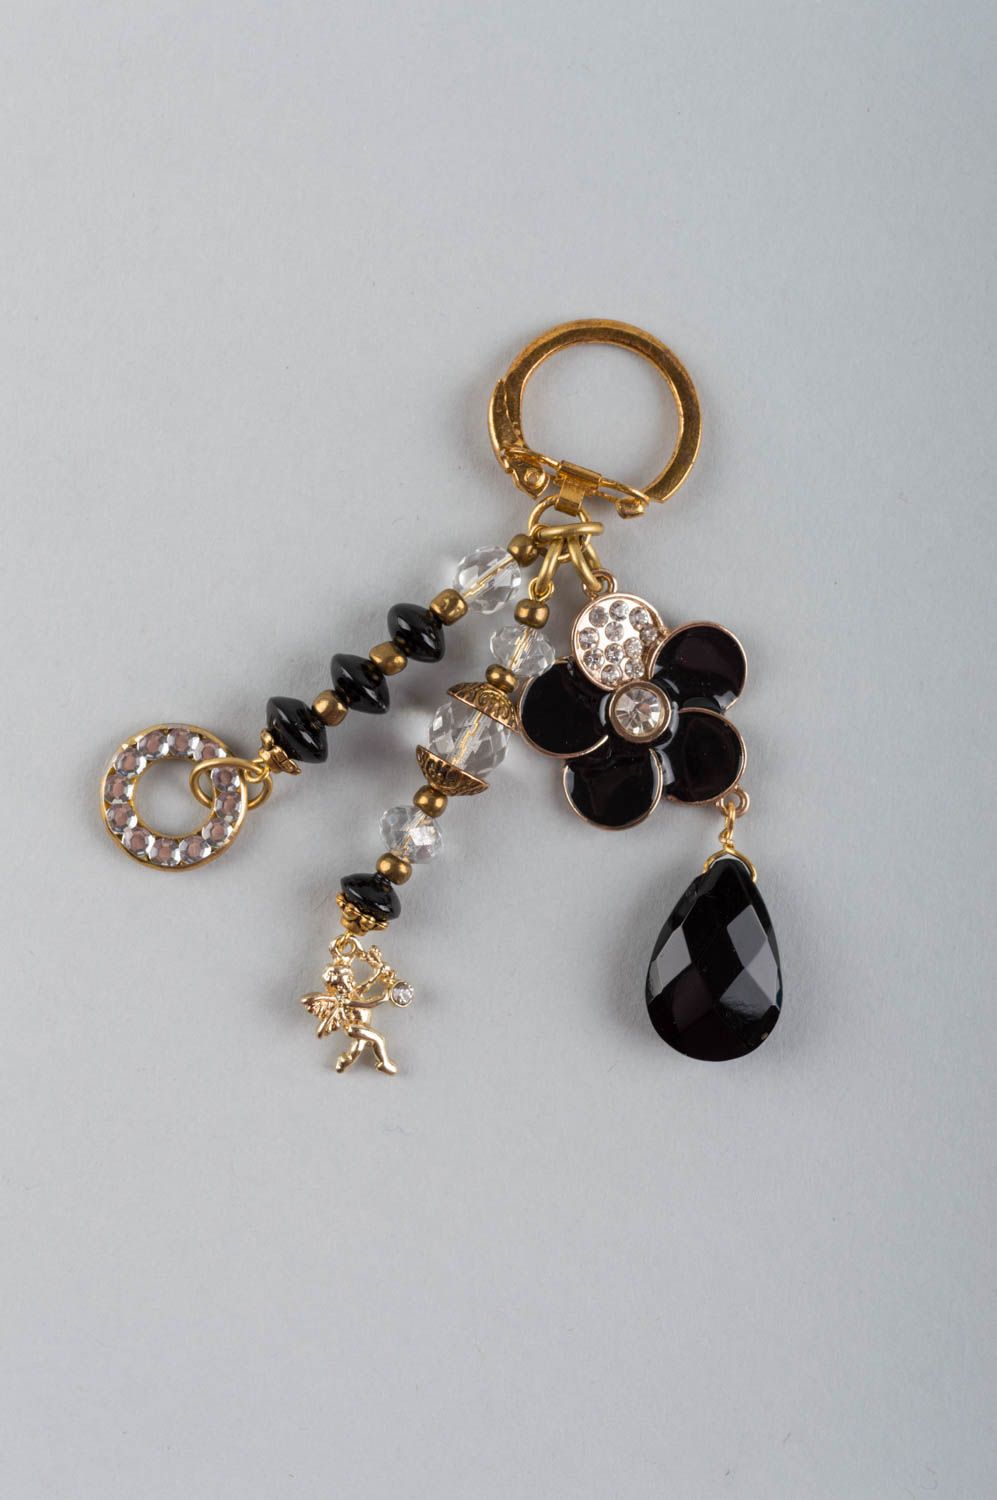 Unusual handmade designer brass keychain with natural stones and crystal beads photo 2